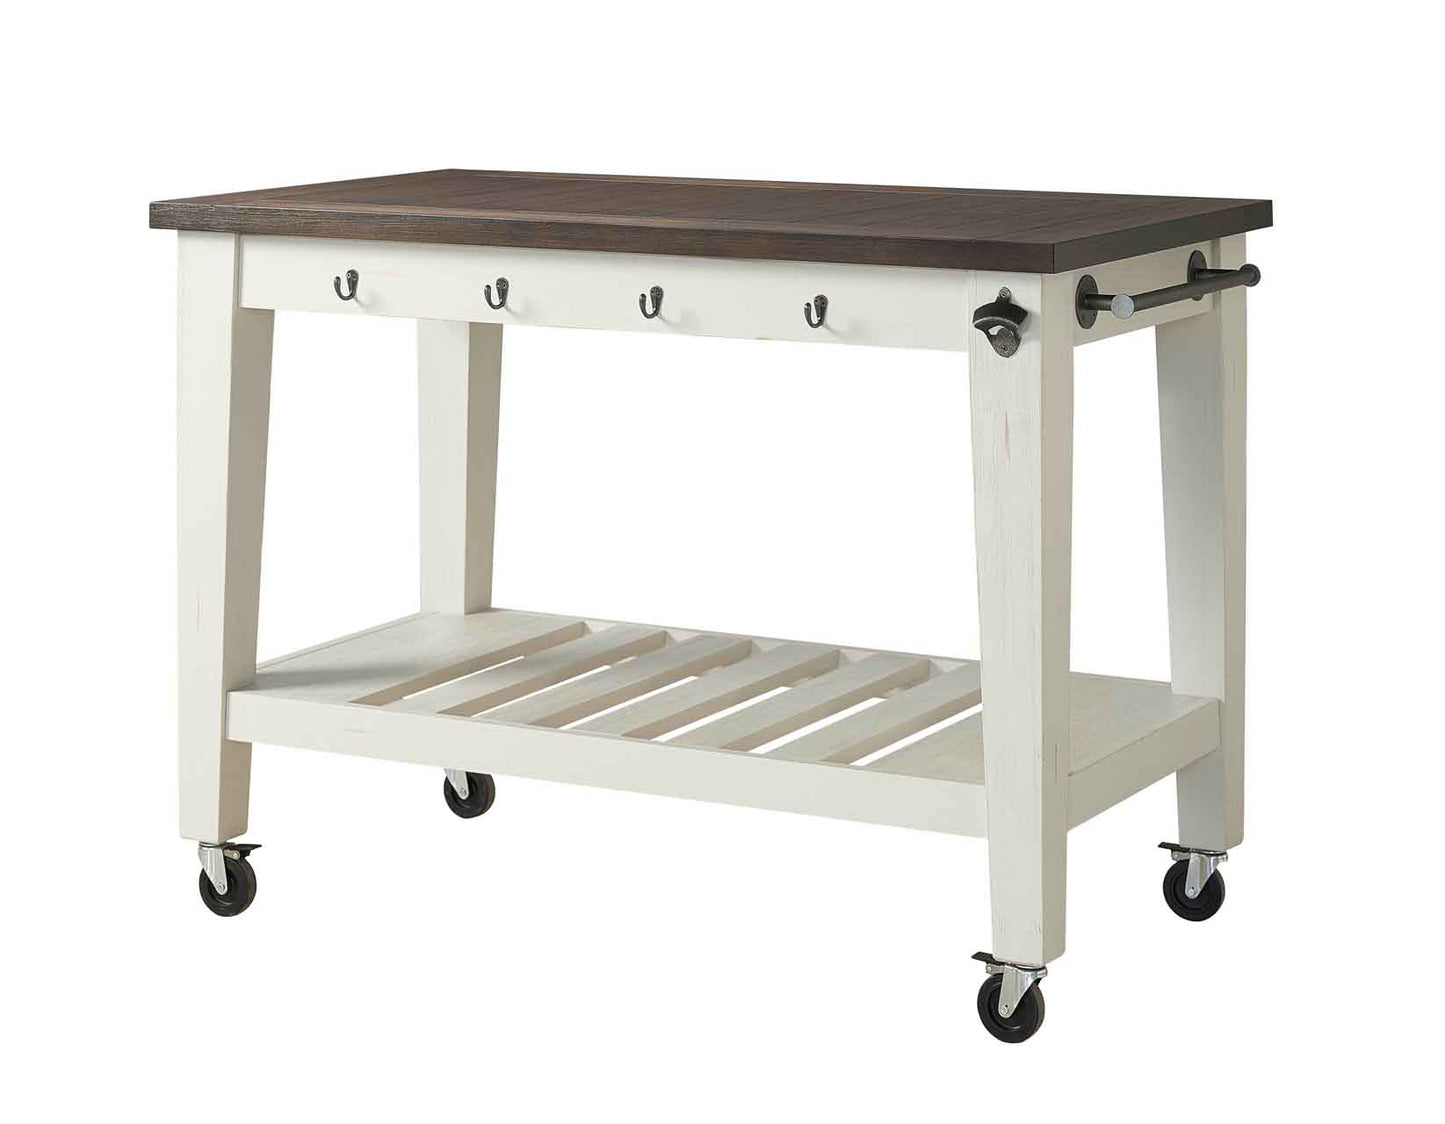 Cayla Counter Height Table by Steve Silver